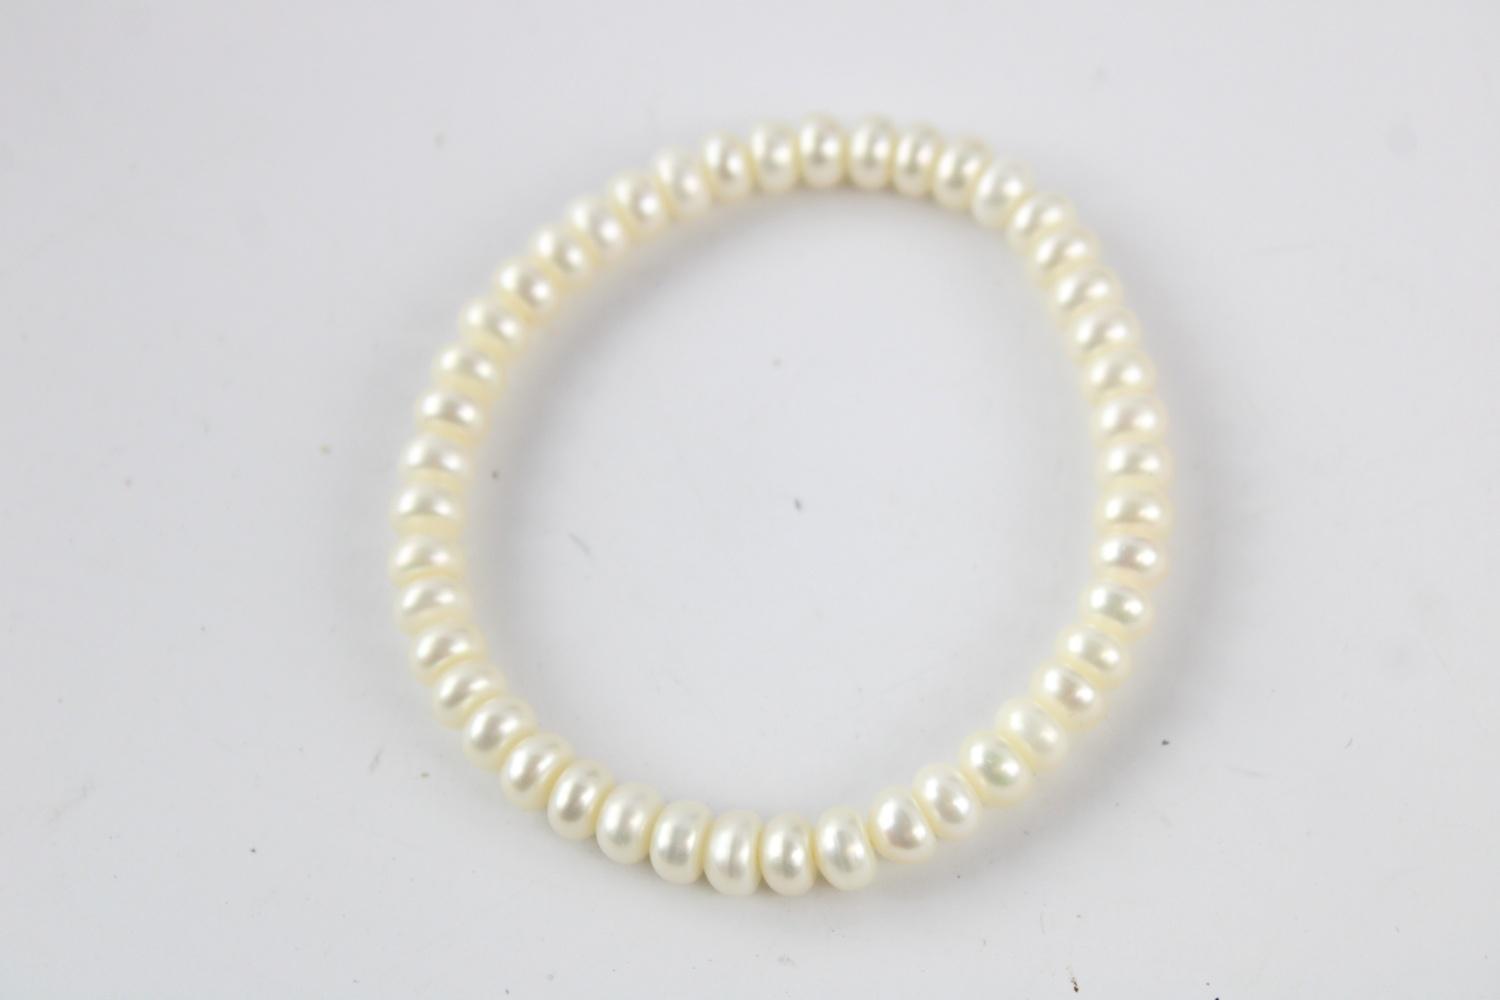 .925 Sterling silver clasped honora pearl branded pearl necklaces w/original packaging - Image 3 of 6